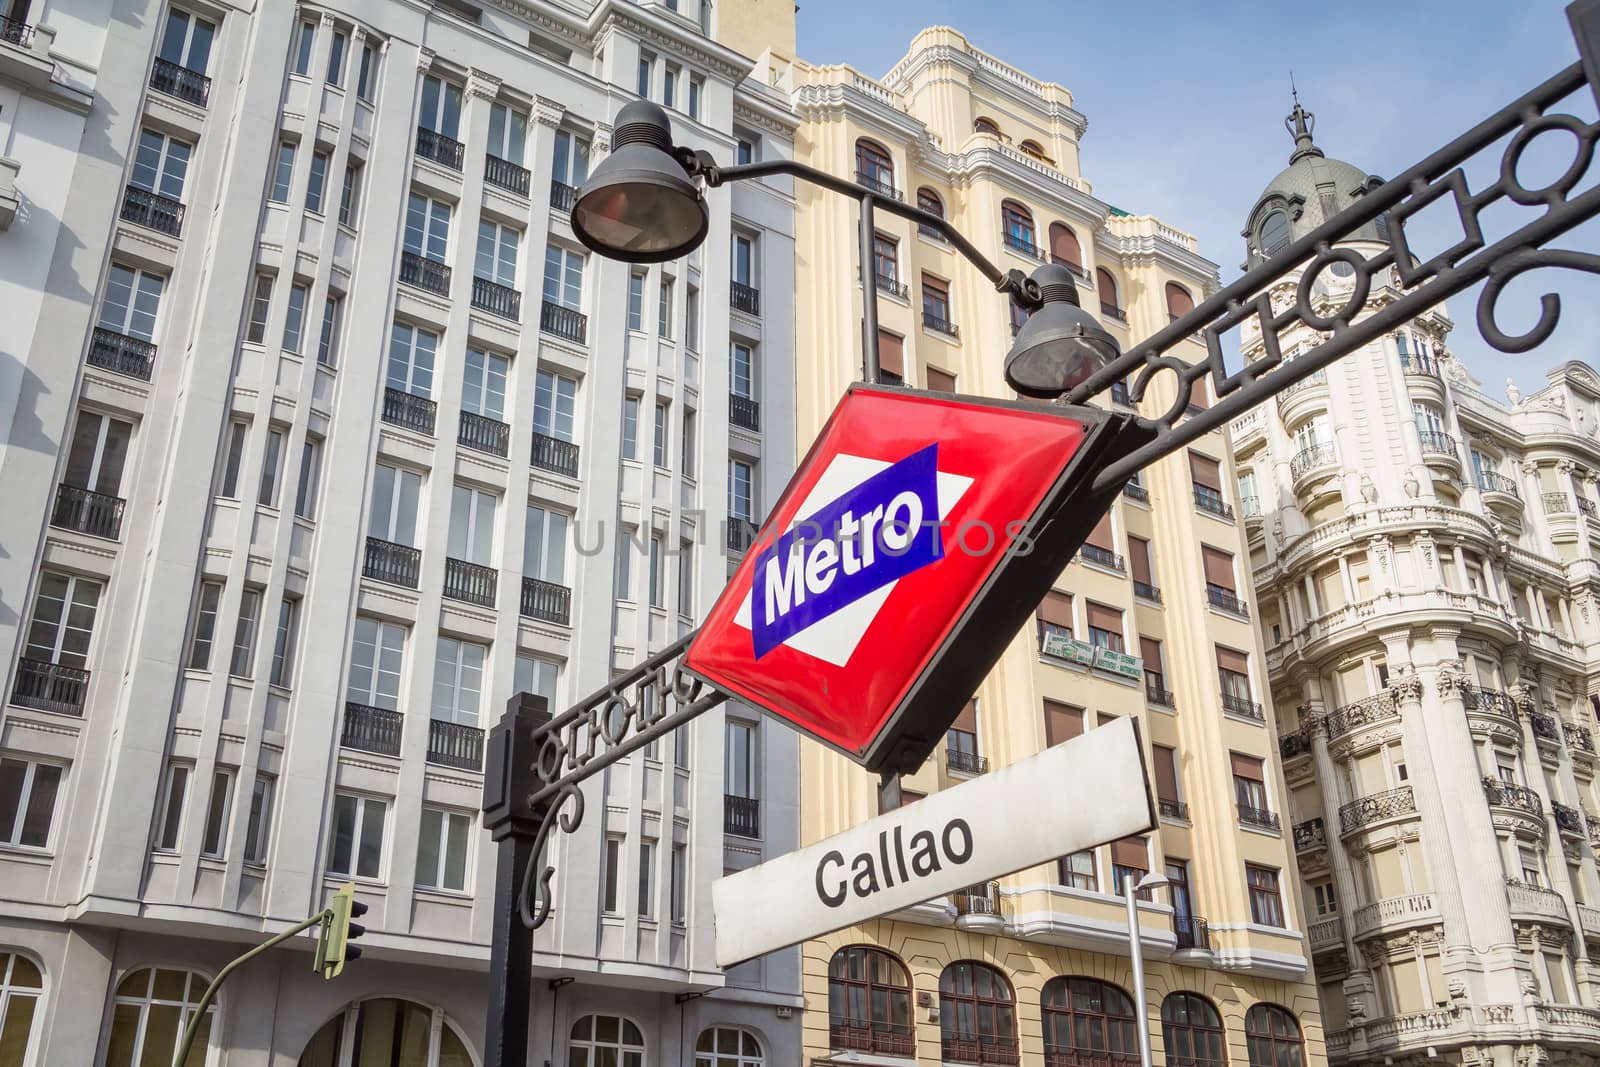 Callao metro sign over city background in Madrid by doble.d